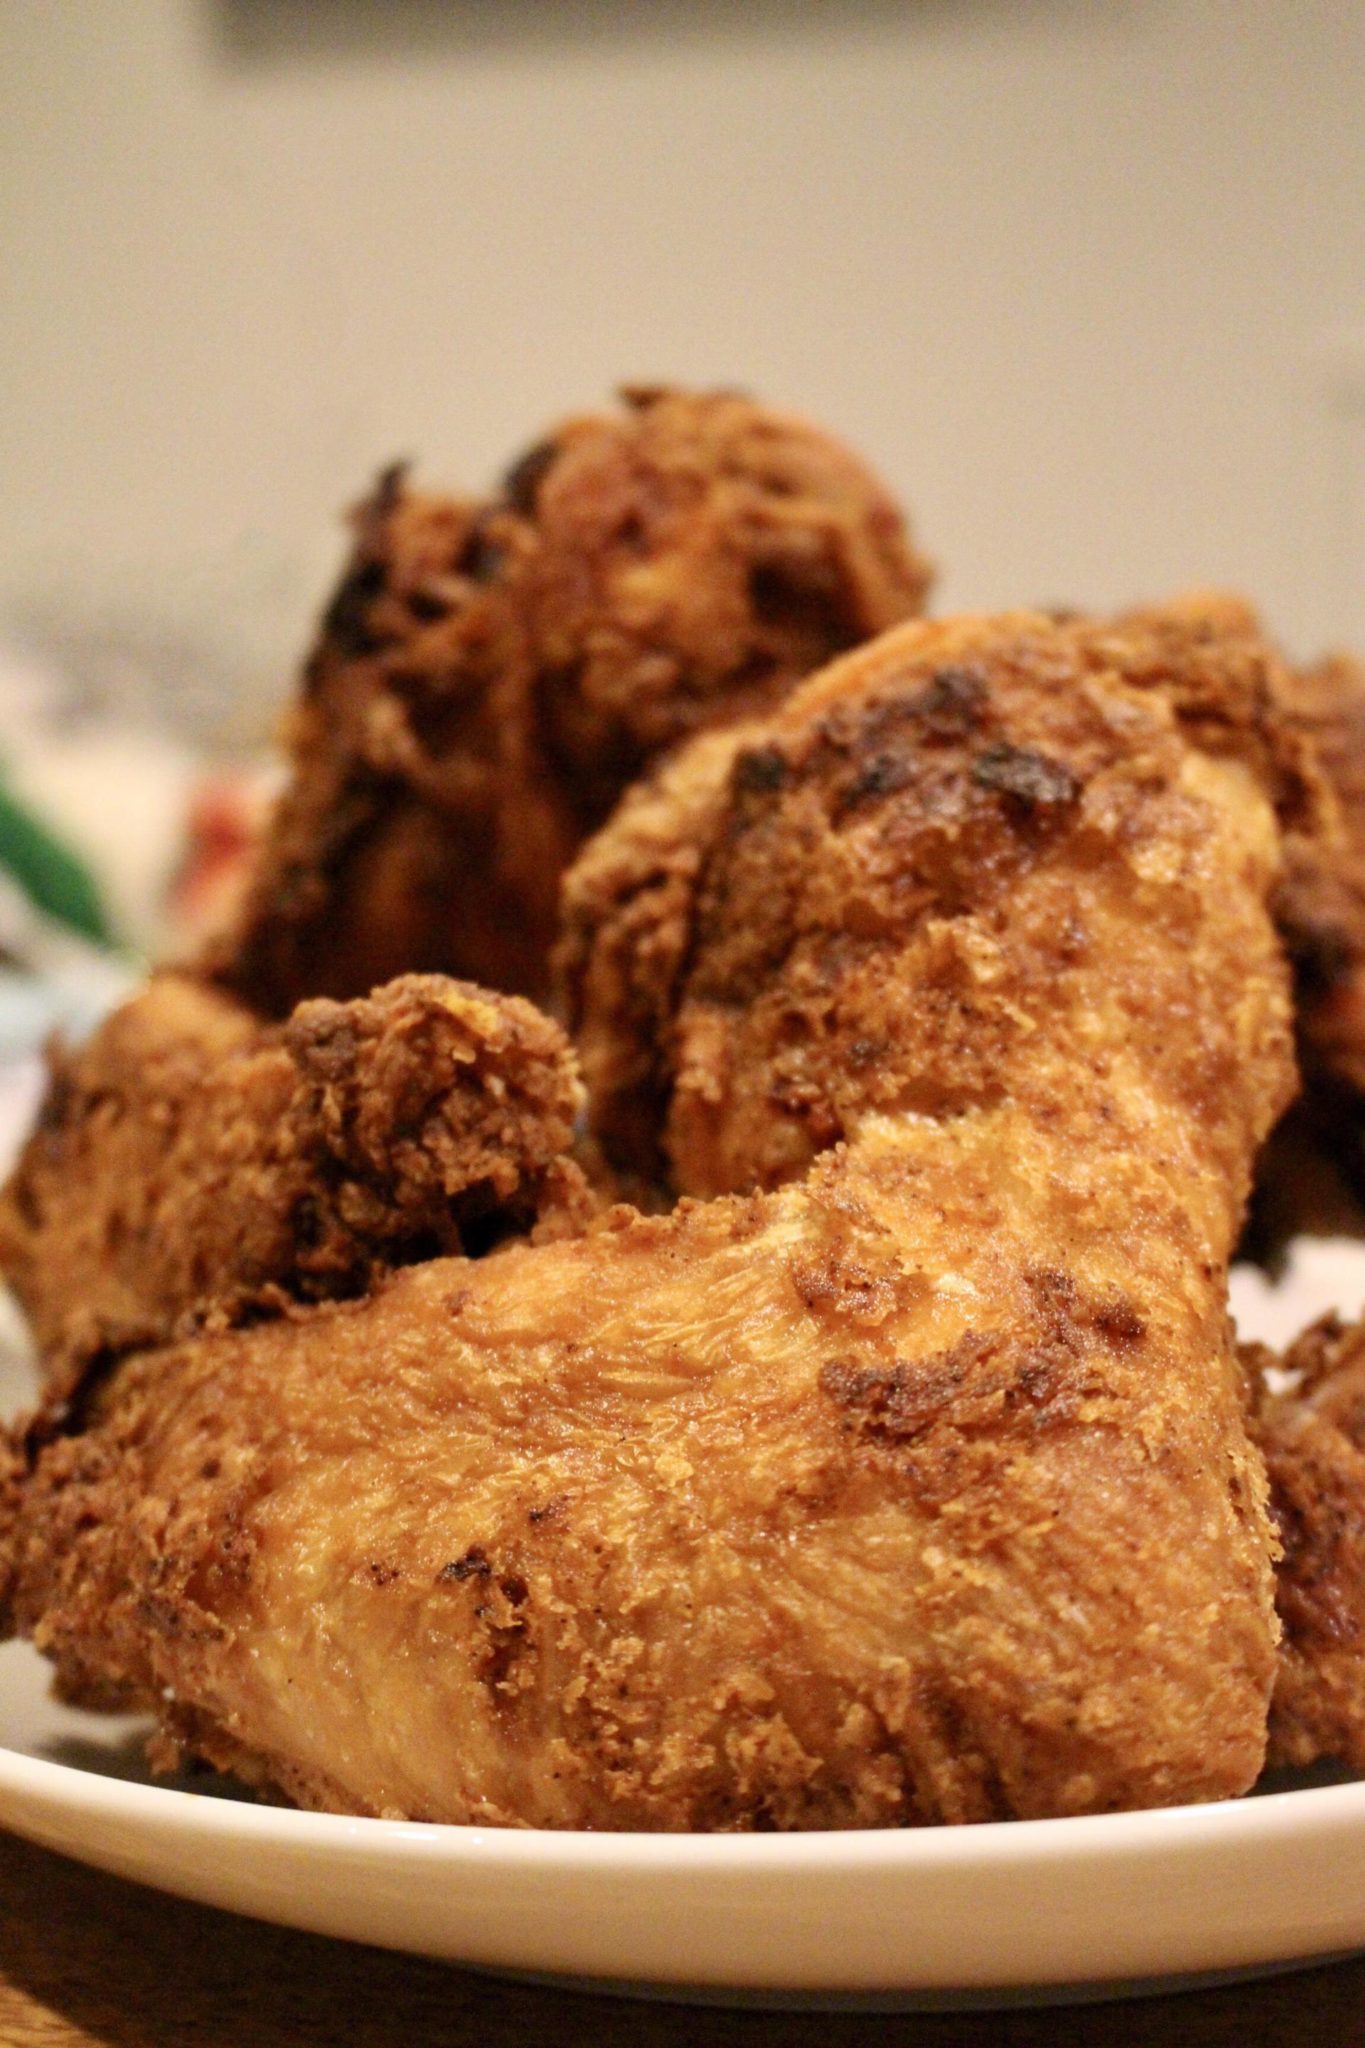 Smokey Fried Turkey Wings by popular New Jersey foodie blogger What's For Dinner Esq.